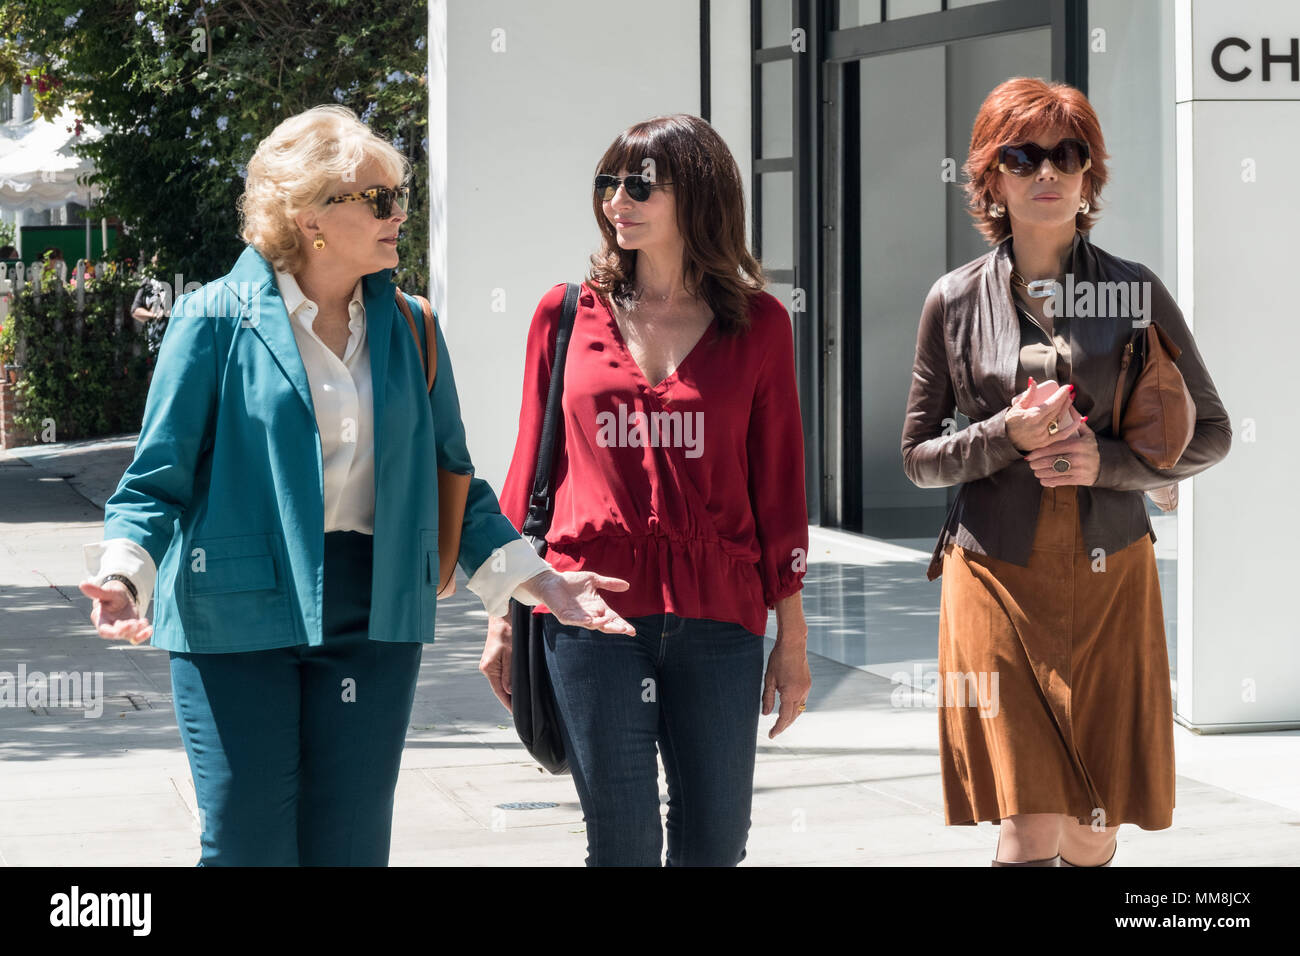 RELEASE DATE: May 18, 2018 TITLE: Book Club STUDIO: Paramount Pictures DIRECTOR: Bill Holderman PLOT: Four lifelong friends have their lives forever changed after reading 50 Shades of Grey in their monthly book club. STARRING: CANDICE BERGEN as Sharon, MARY STEENBURGEN as Carol, JANE FONDA as Vivian. (Credit Image: © Paramount Pictures/Entertainment Pictures) Stock Photo